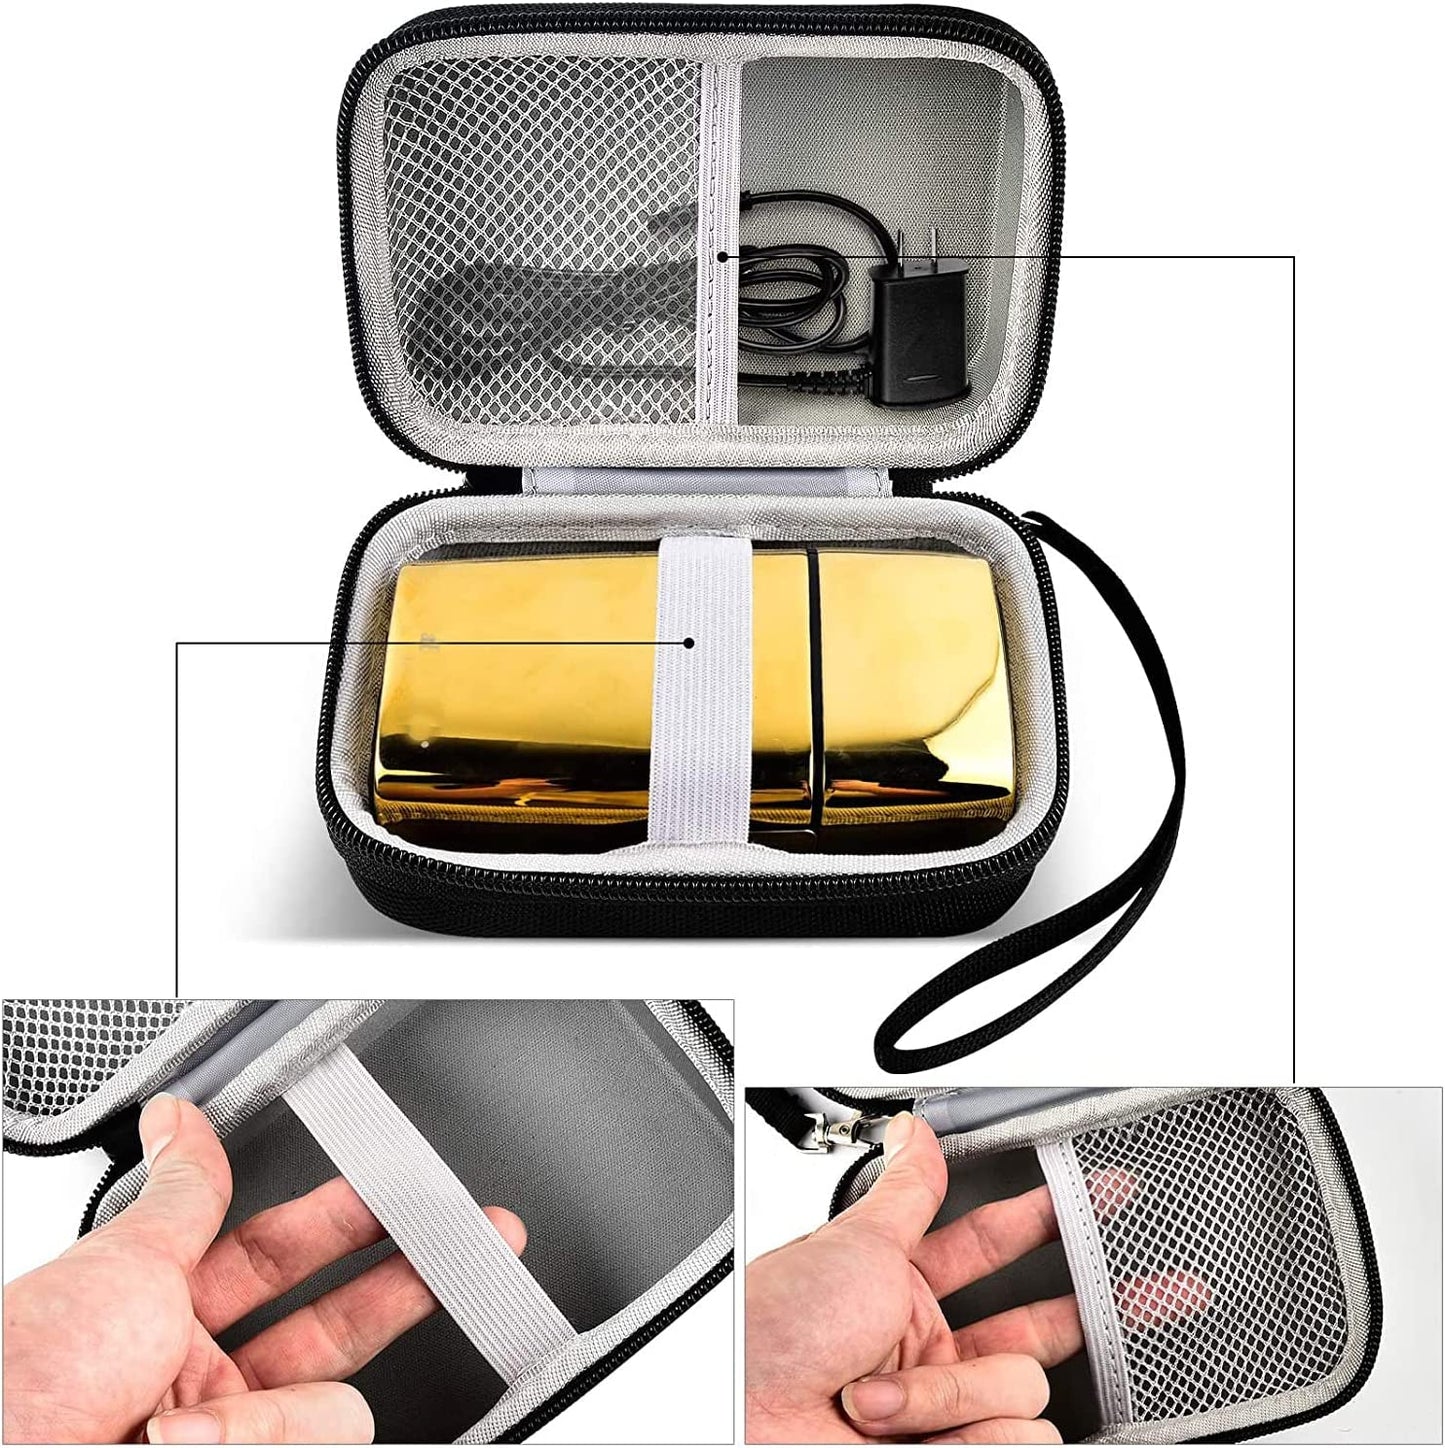 Case Compatible with BaBylissPRO GOLDFX/ ROSEFX/BLACKFX/ Collection for Barberology Cordless Metal Double Foil Shaver and Replacement Foil Cutters(Box Only)